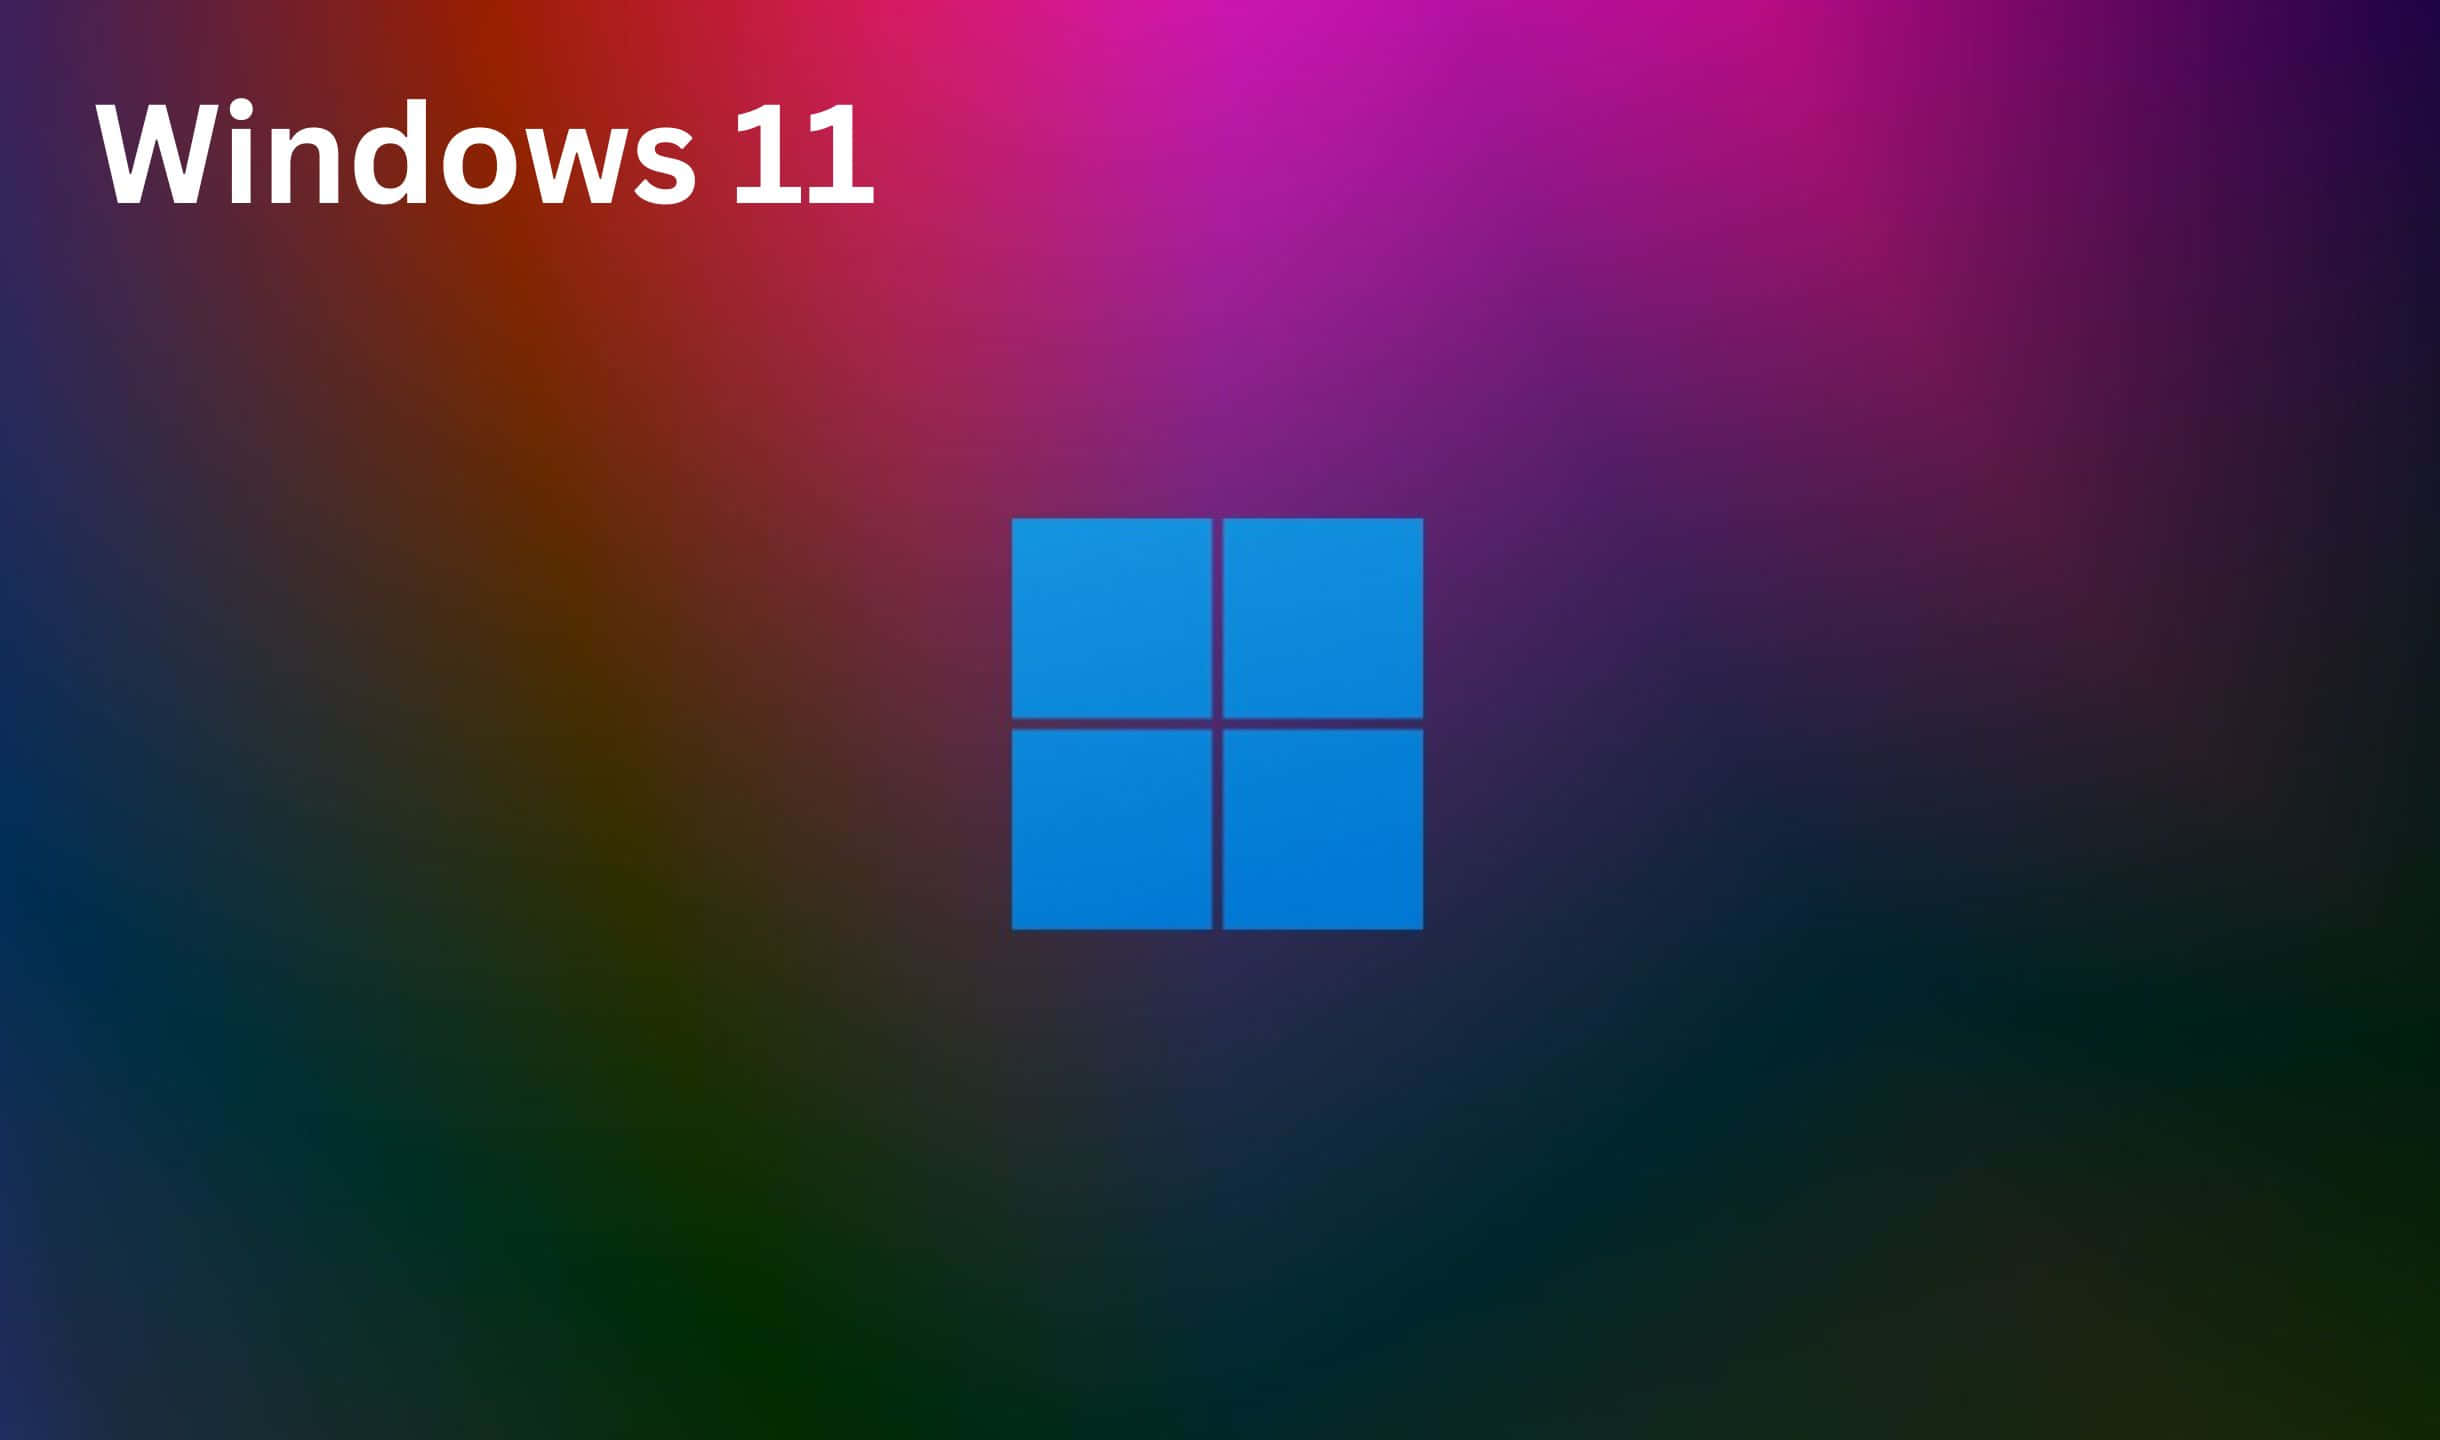 Windows 10 Logo On A Colorful Background